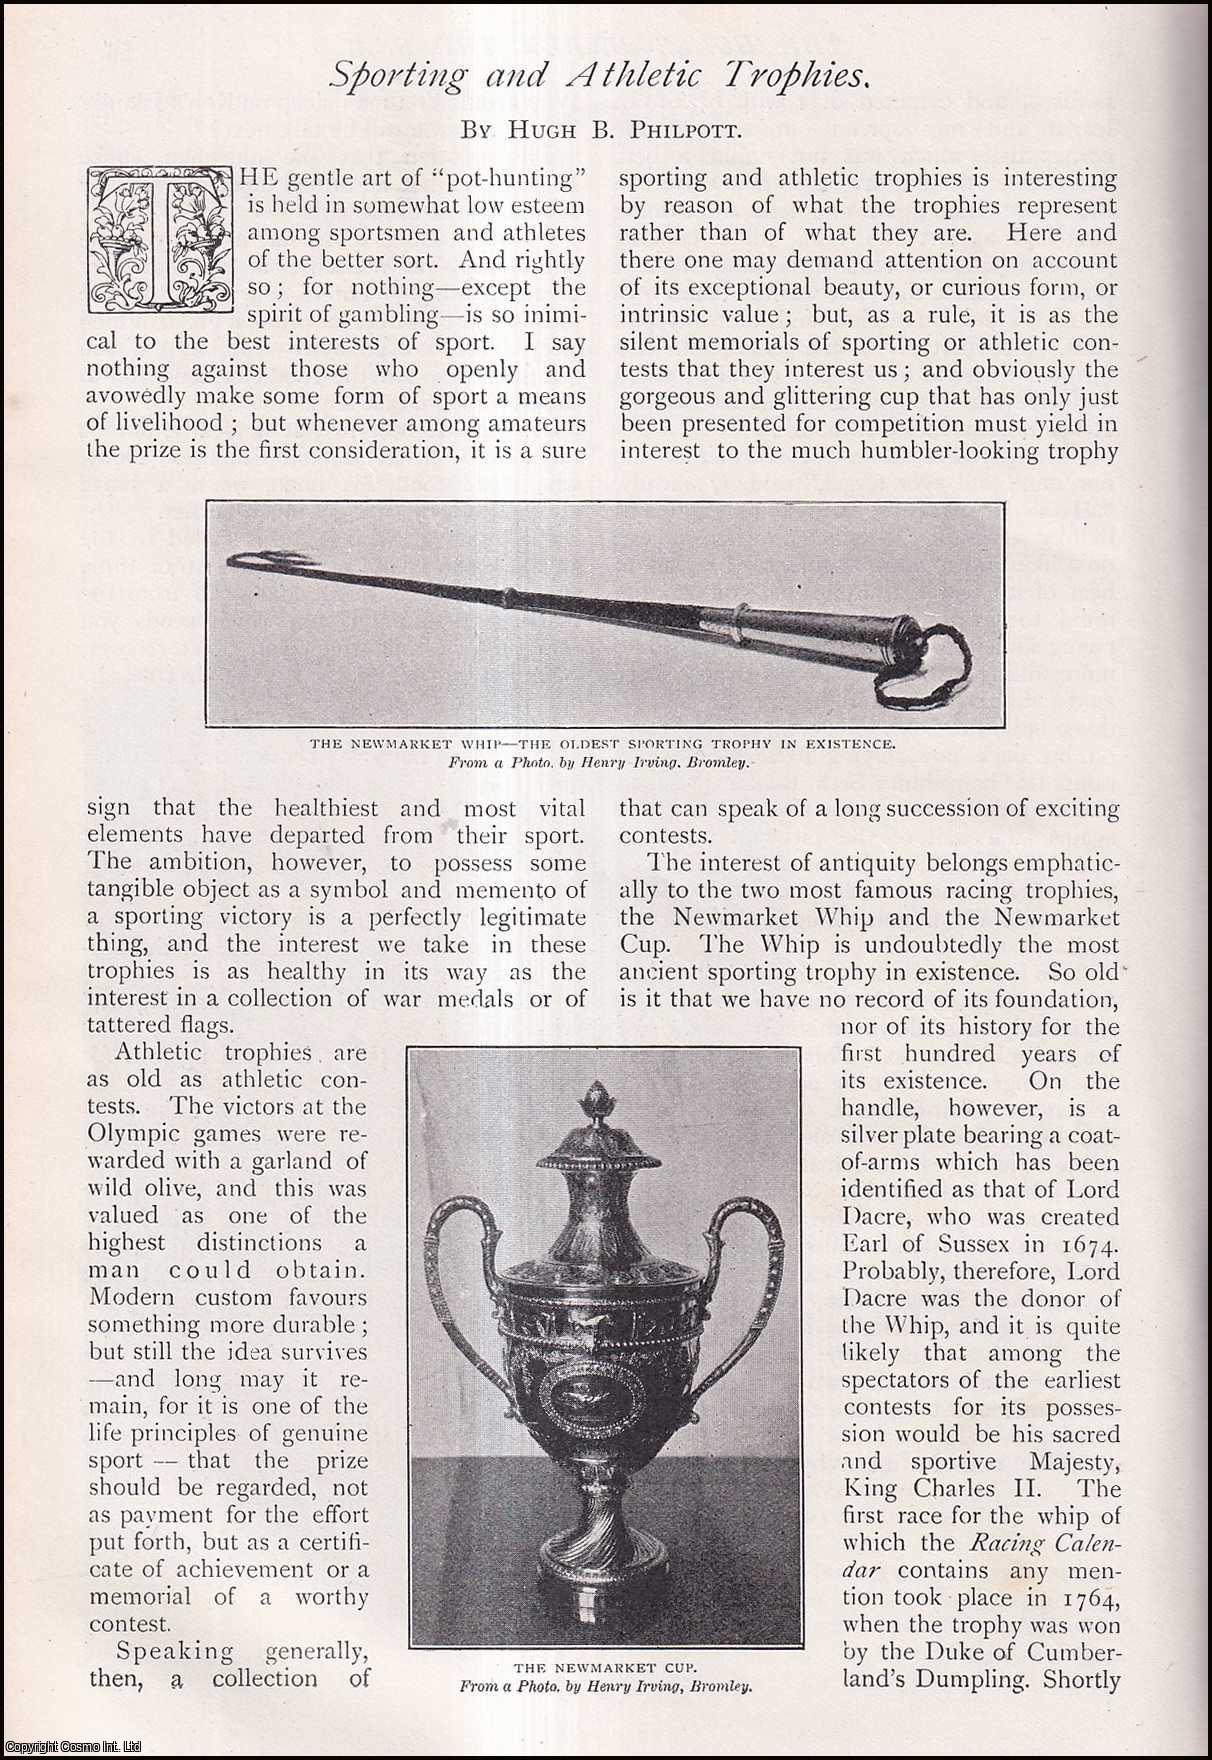 Hugh B. Philpott - Sporting & Athletic Trophies : West Norfolk hunt Steeplechase Cup ; Doggett's Coat & Badge ; the America Cup ; Cup for Yachting Designed by the German Emperor & more. An uncommon original article from The Strand Magazine, 1902.